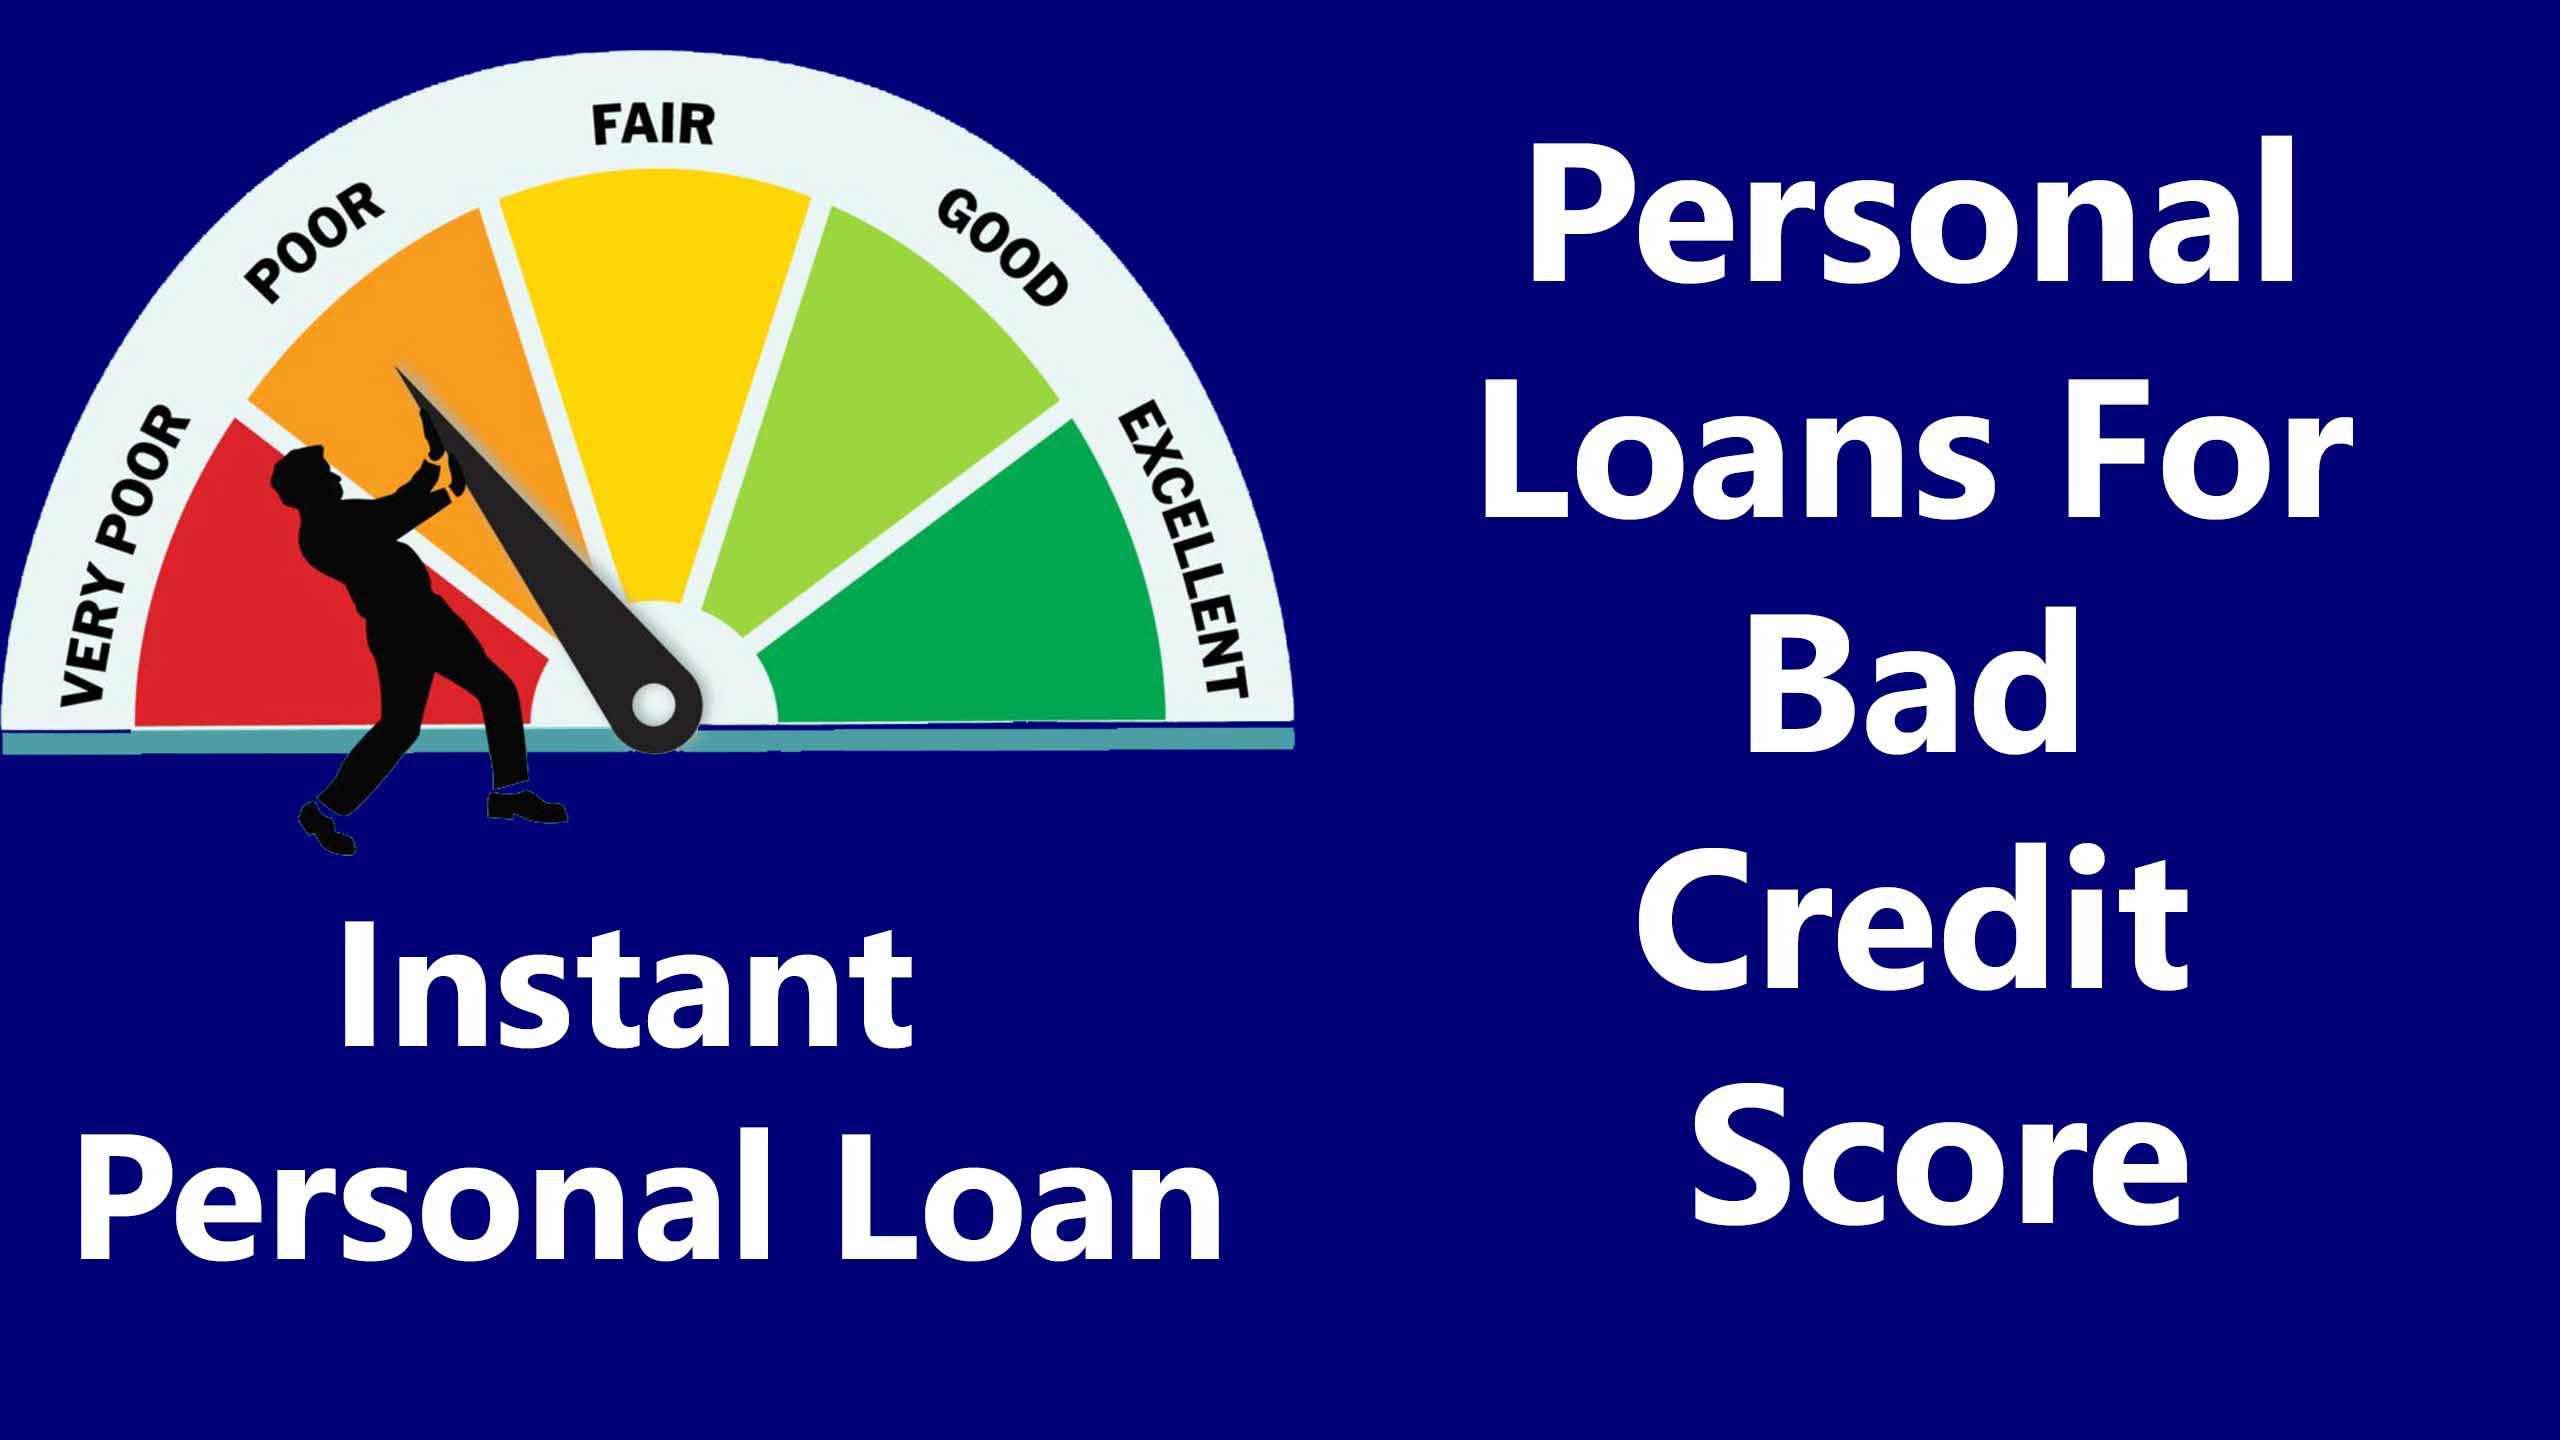 Personal Loans For Bad Credit Score